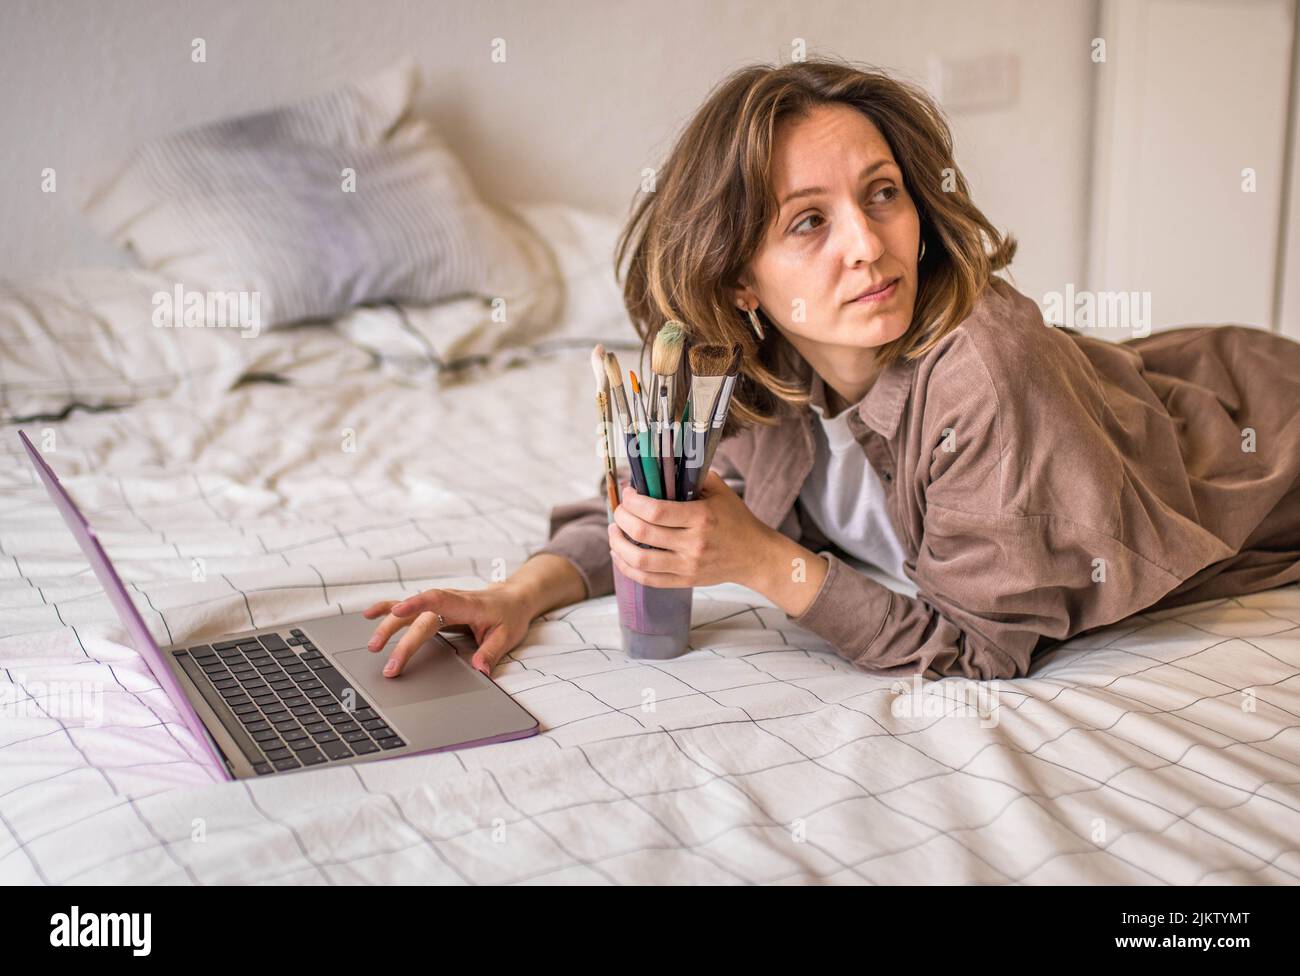 Picture of Thoughtful 30's Slavic Woman Deciding What to Paint Holding a Can of Brushes in One Hand and Typing on her Laptop from her Bedroom Bed Stock Photo